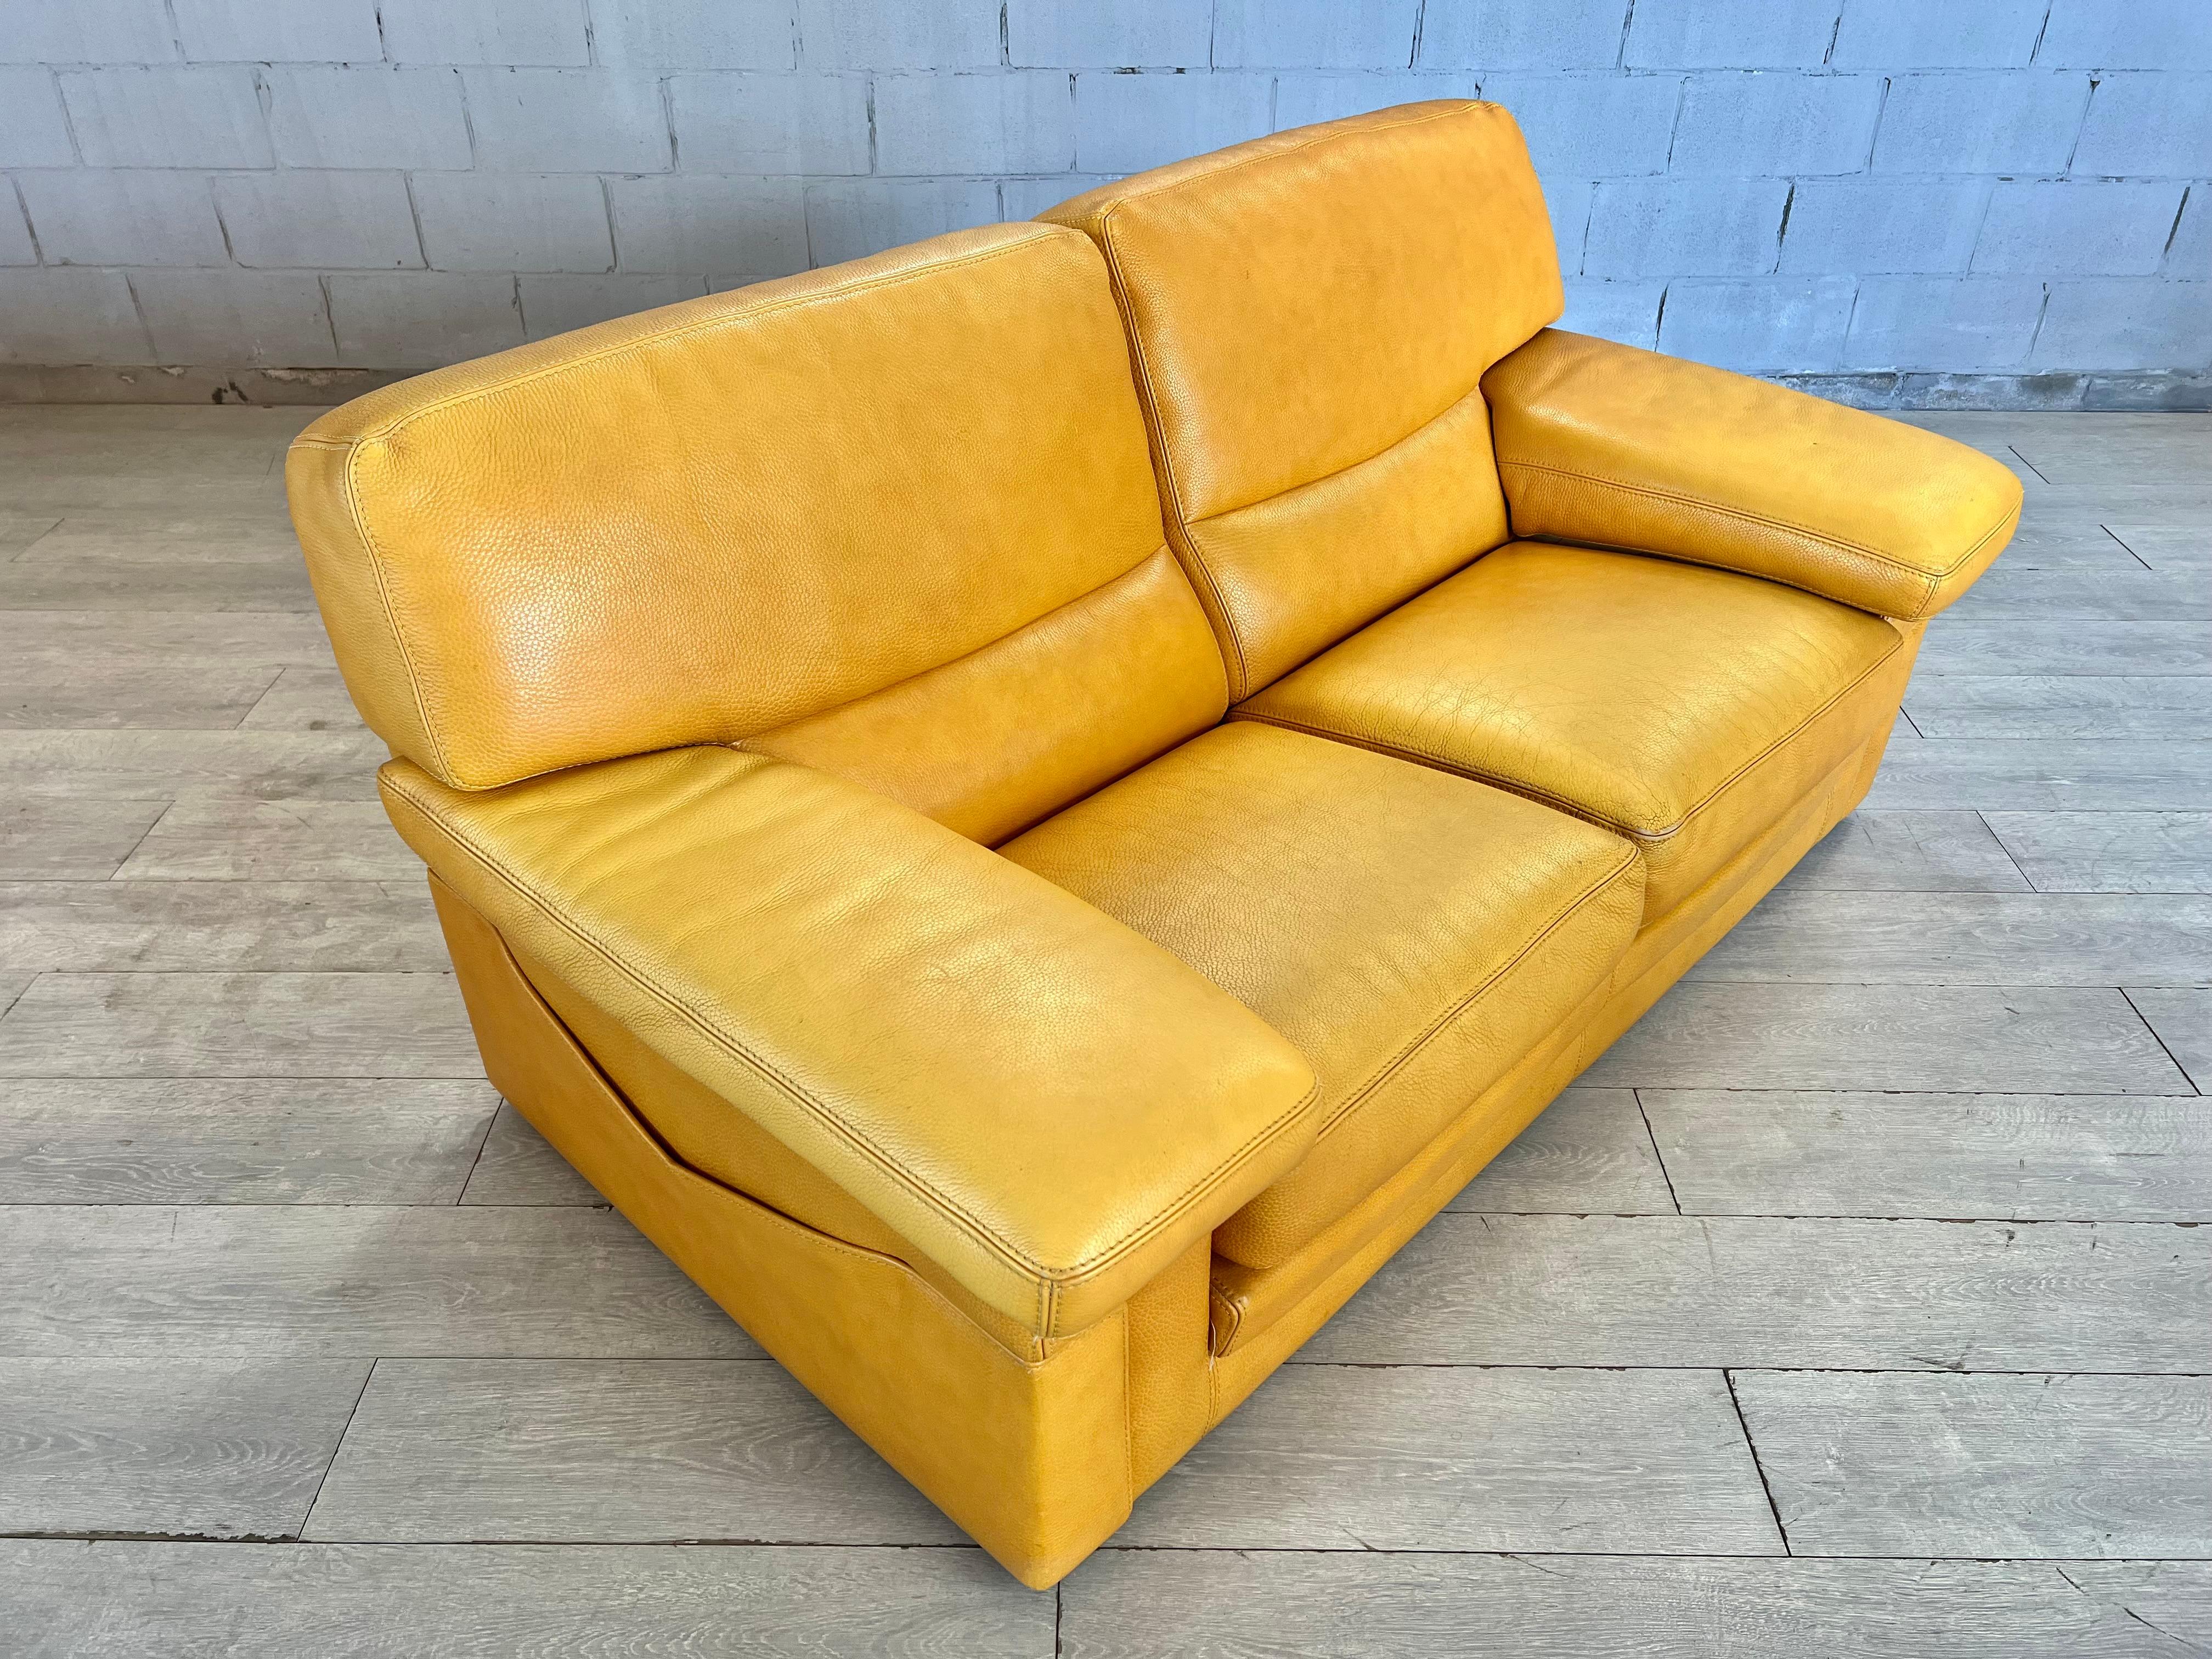 Original Vintage Modern Yellow Leather Sofa Lounger by Roche Bobois, Stamped 1